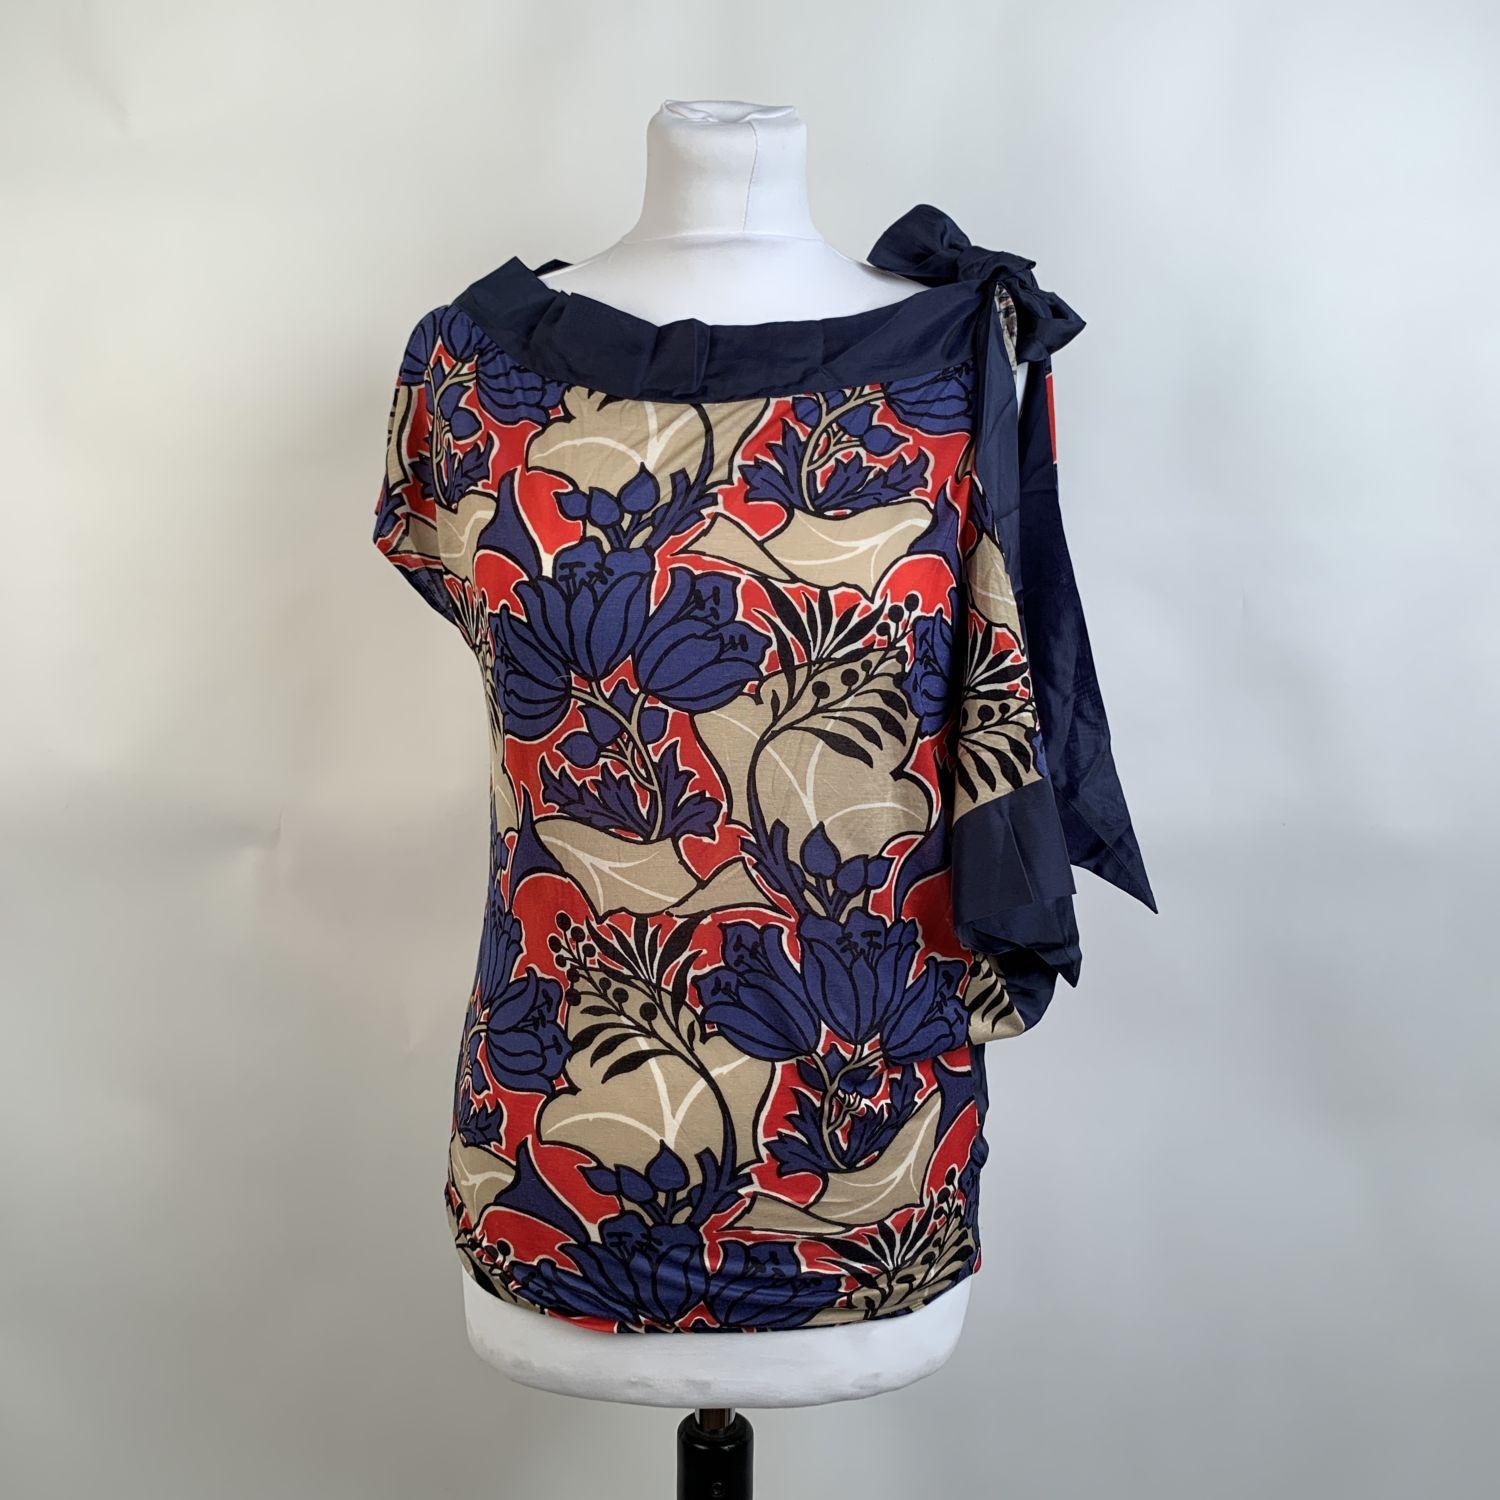 Prada top t-shirt with floral dsign in blue, red and beige color. It features boat neckline, an asymmetric design, hadkerchief detailing on the right side and bow detailing on the shoulder. Composition tag is missing. it seems to be cotton jersey